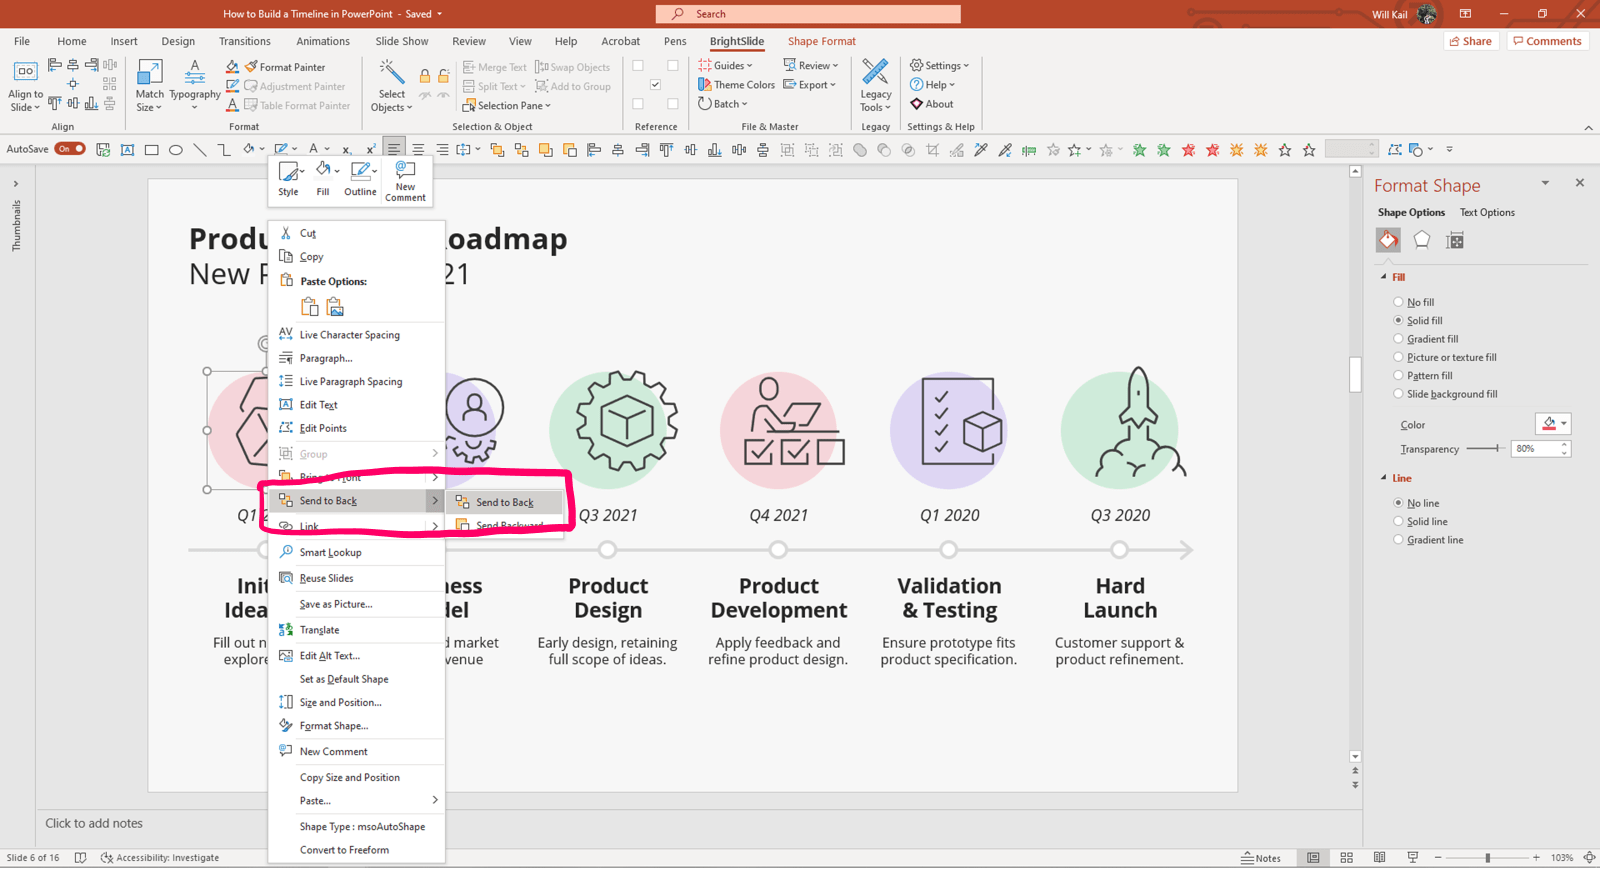 Annotated screenshot showing PowerPoint timeline slide. Right click cursor menu is open and" Send to back" option is highlighted.